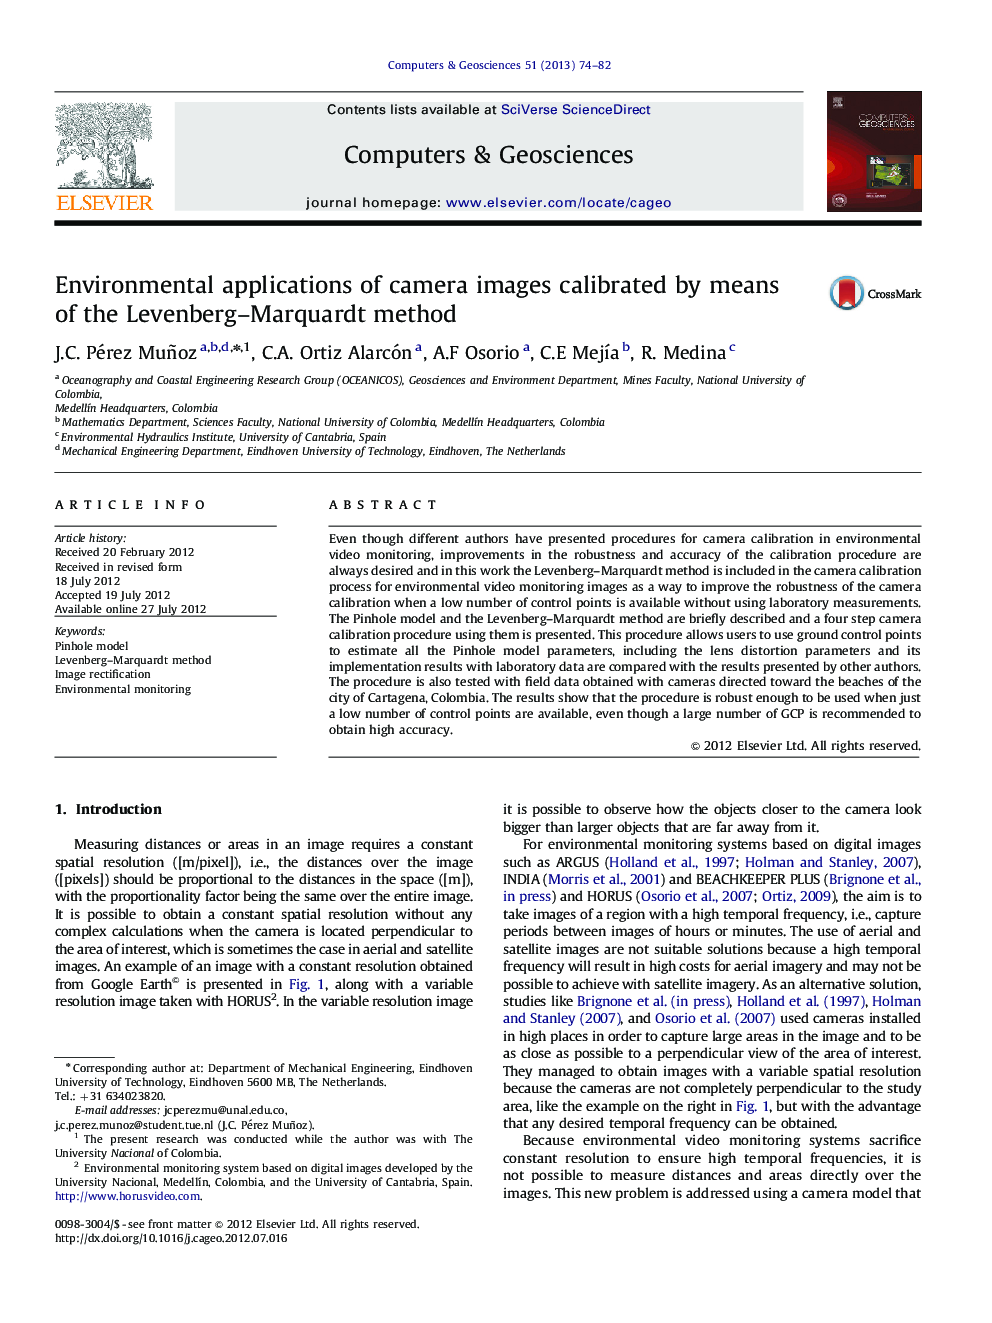 Environmental applications of camera images calibrated by means of the Levenberg–Marquardt method